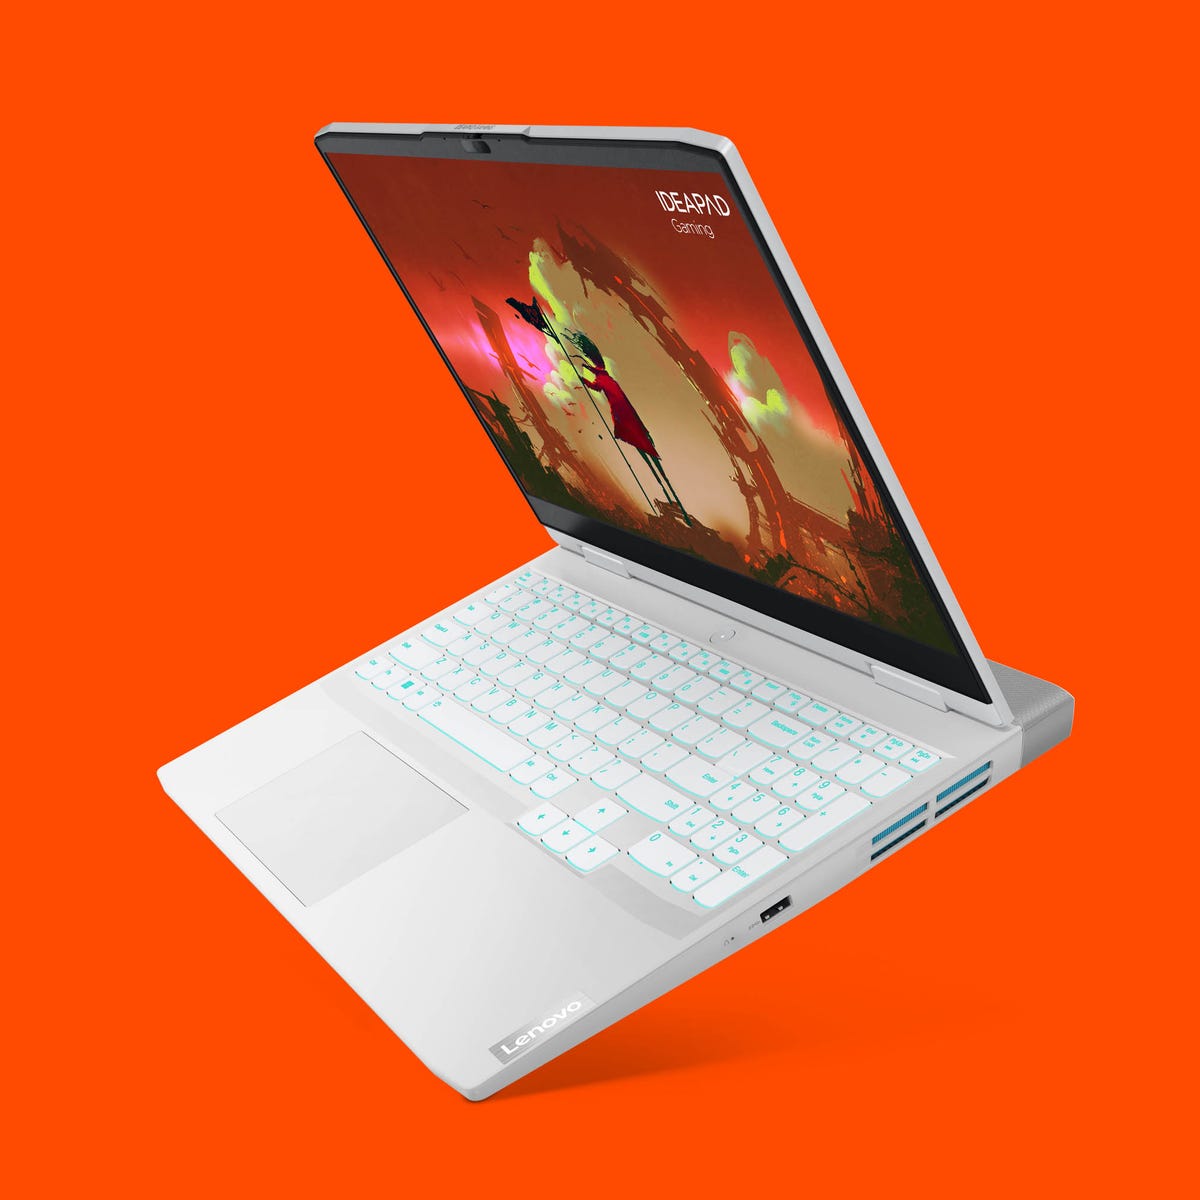 Lenovo IdeaPad Gaming 3 Laptops Are Upscale Options for First-Time